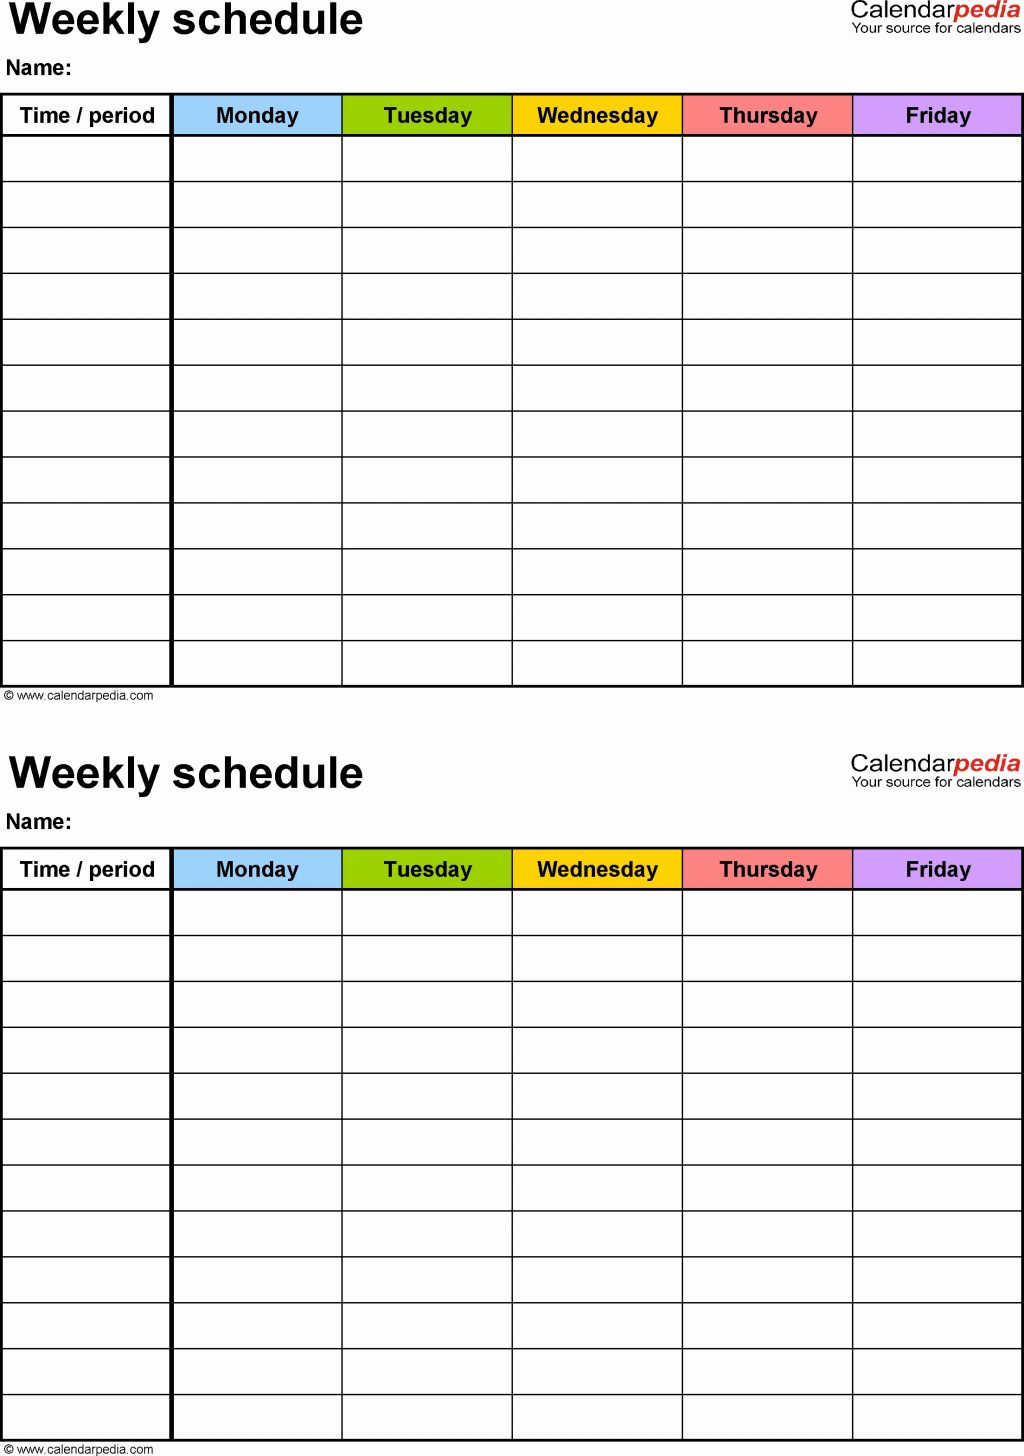 Weekly Hours Spreadsheet Within Spreadsheet Examplesy Hours Worked Template Hour Excel Work